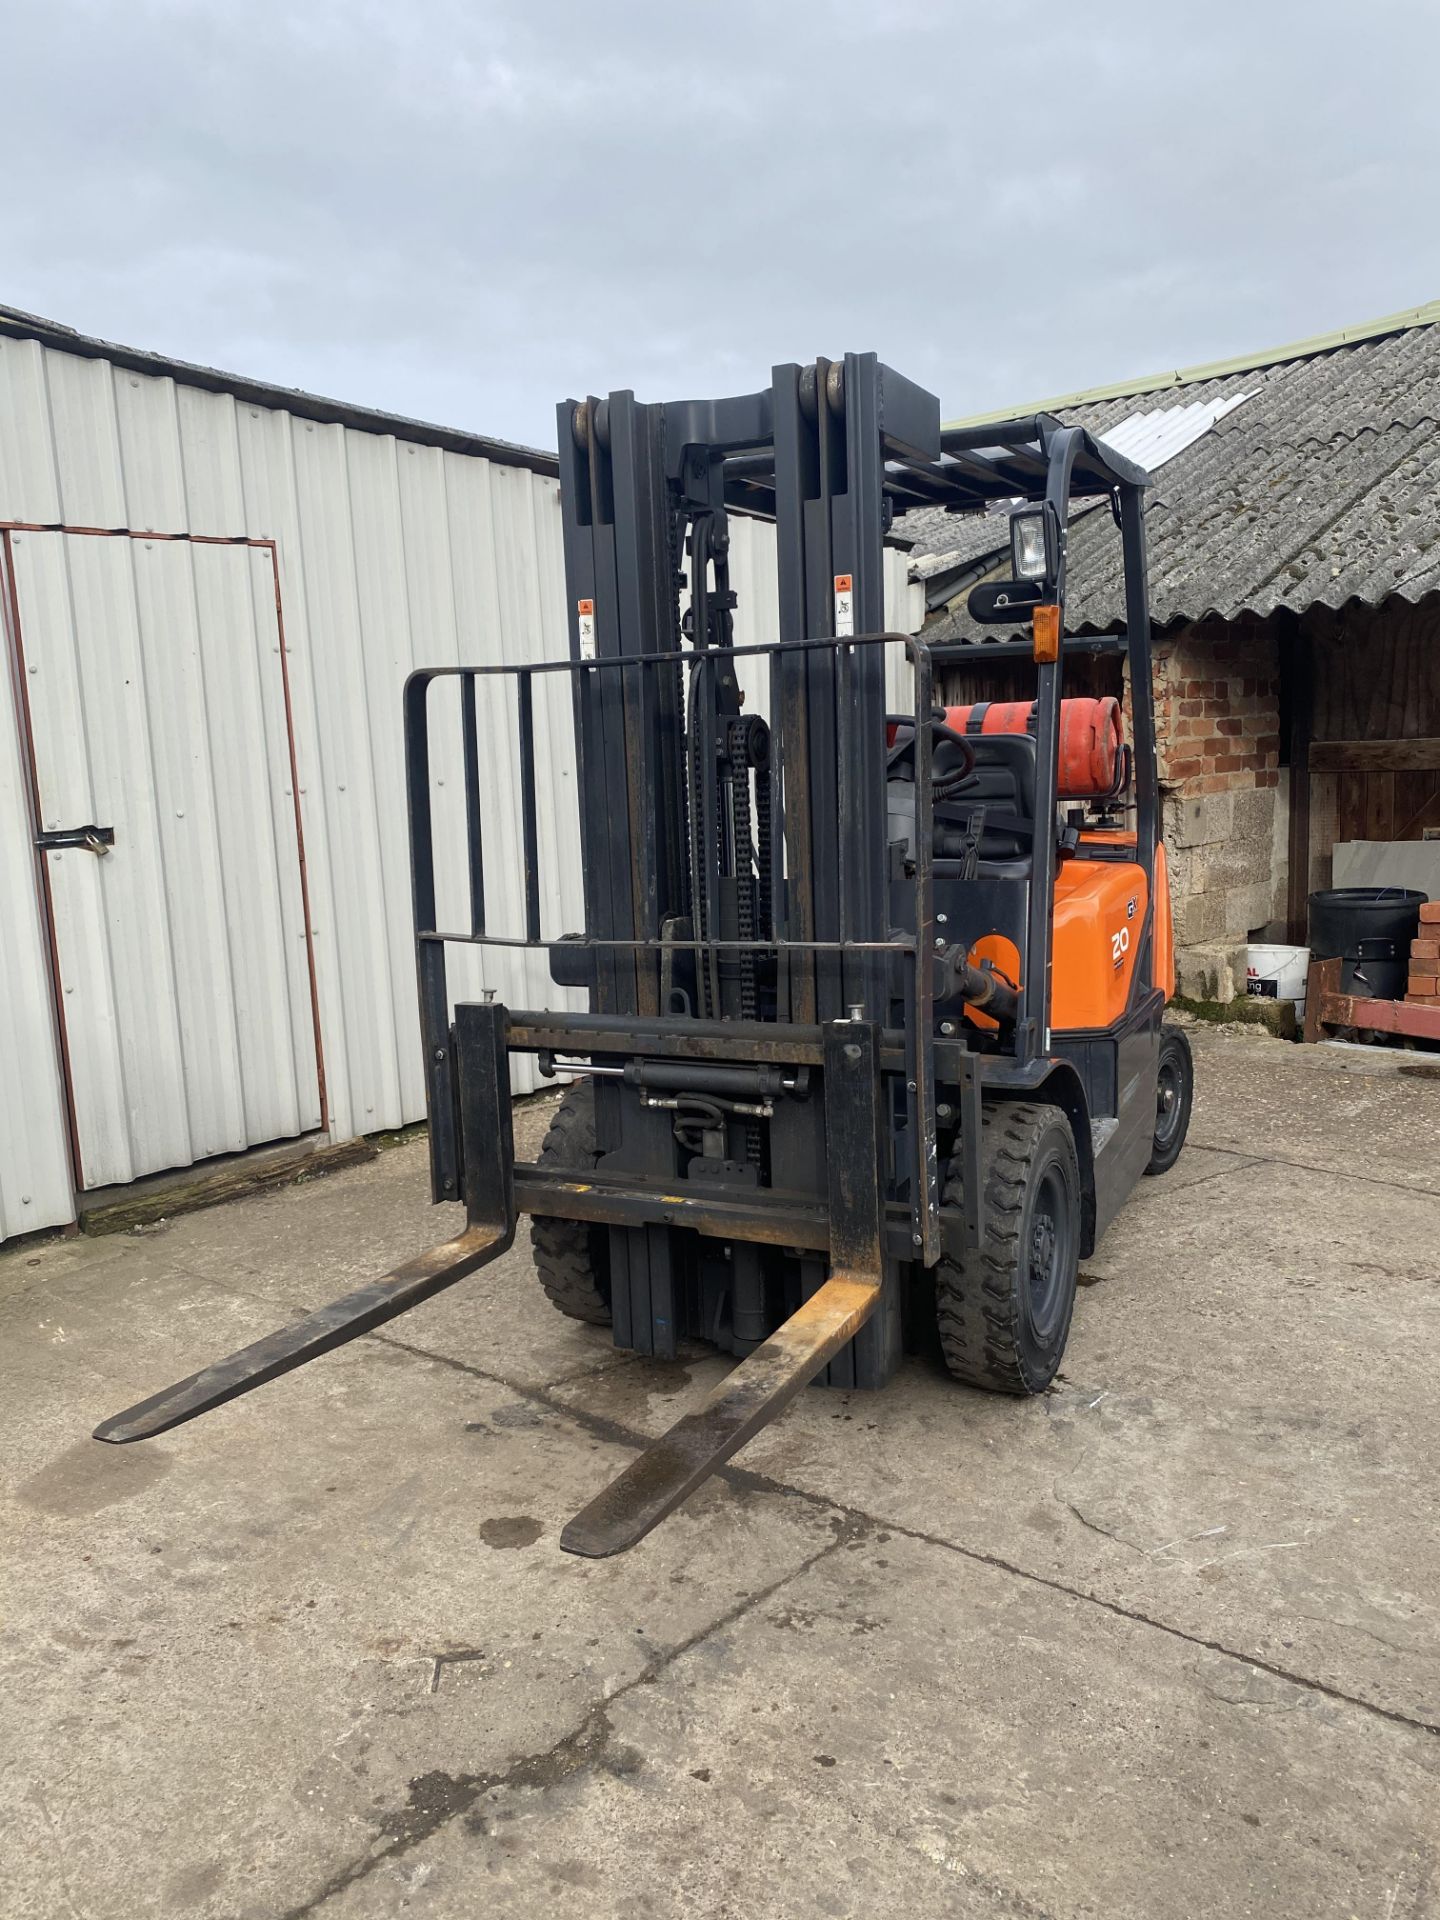 DOOSAN 2 TON GAS FORKLIFT, YEAR 2016, TRIPLE MAST, FREE LIFT, CONTAINER SPEC, SIDE SHIFT, 477 HOURS! - Image 5 of 9